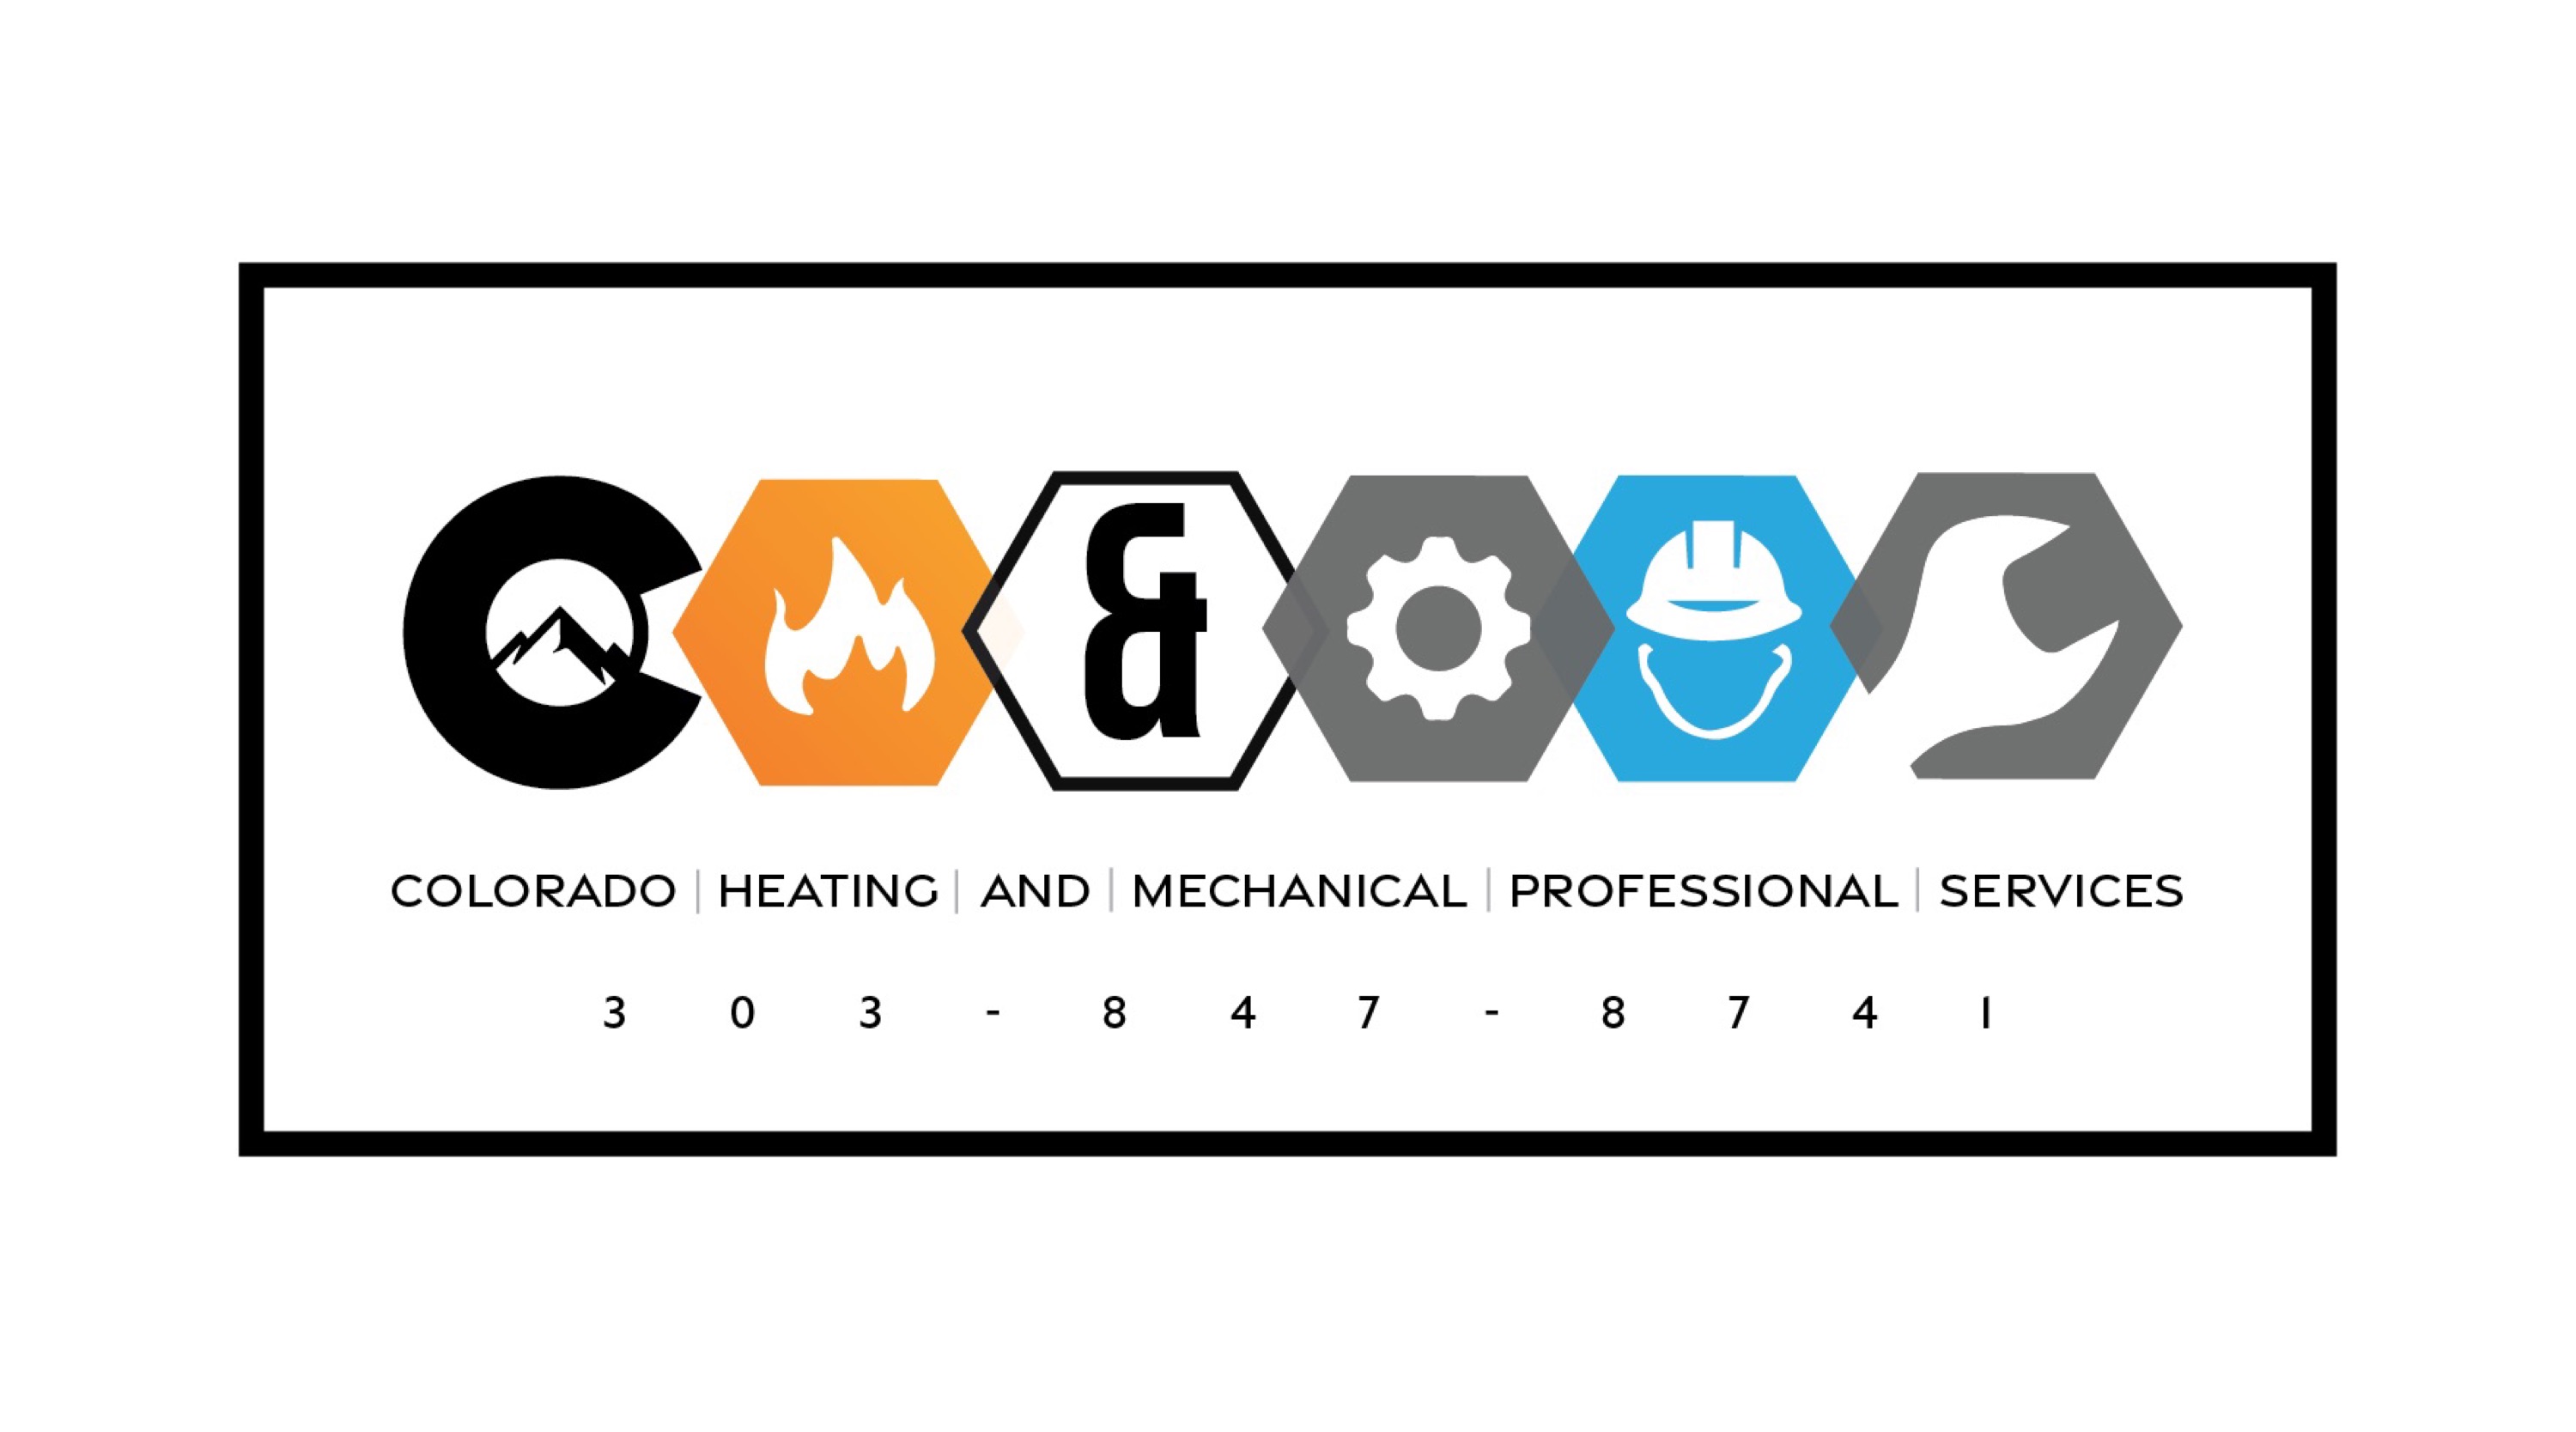 Colorado Heating and Mechanical Professional Services, LLC Logo